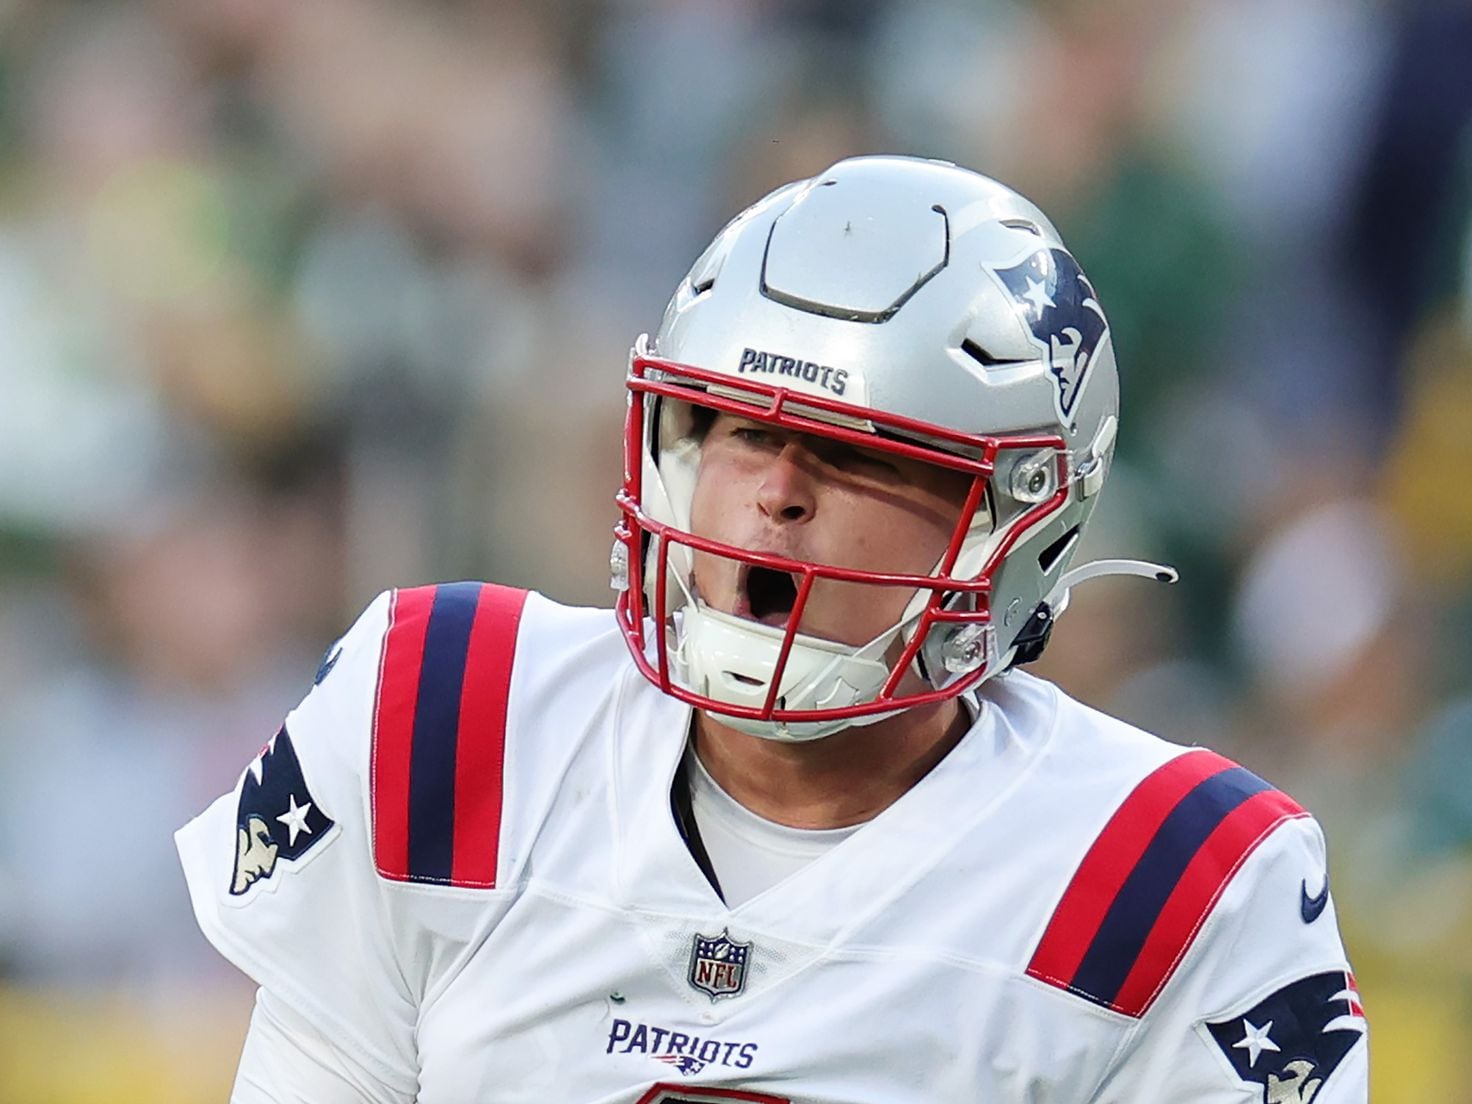 Report: Bailey Zappe will start as QB for the New England Patriots in